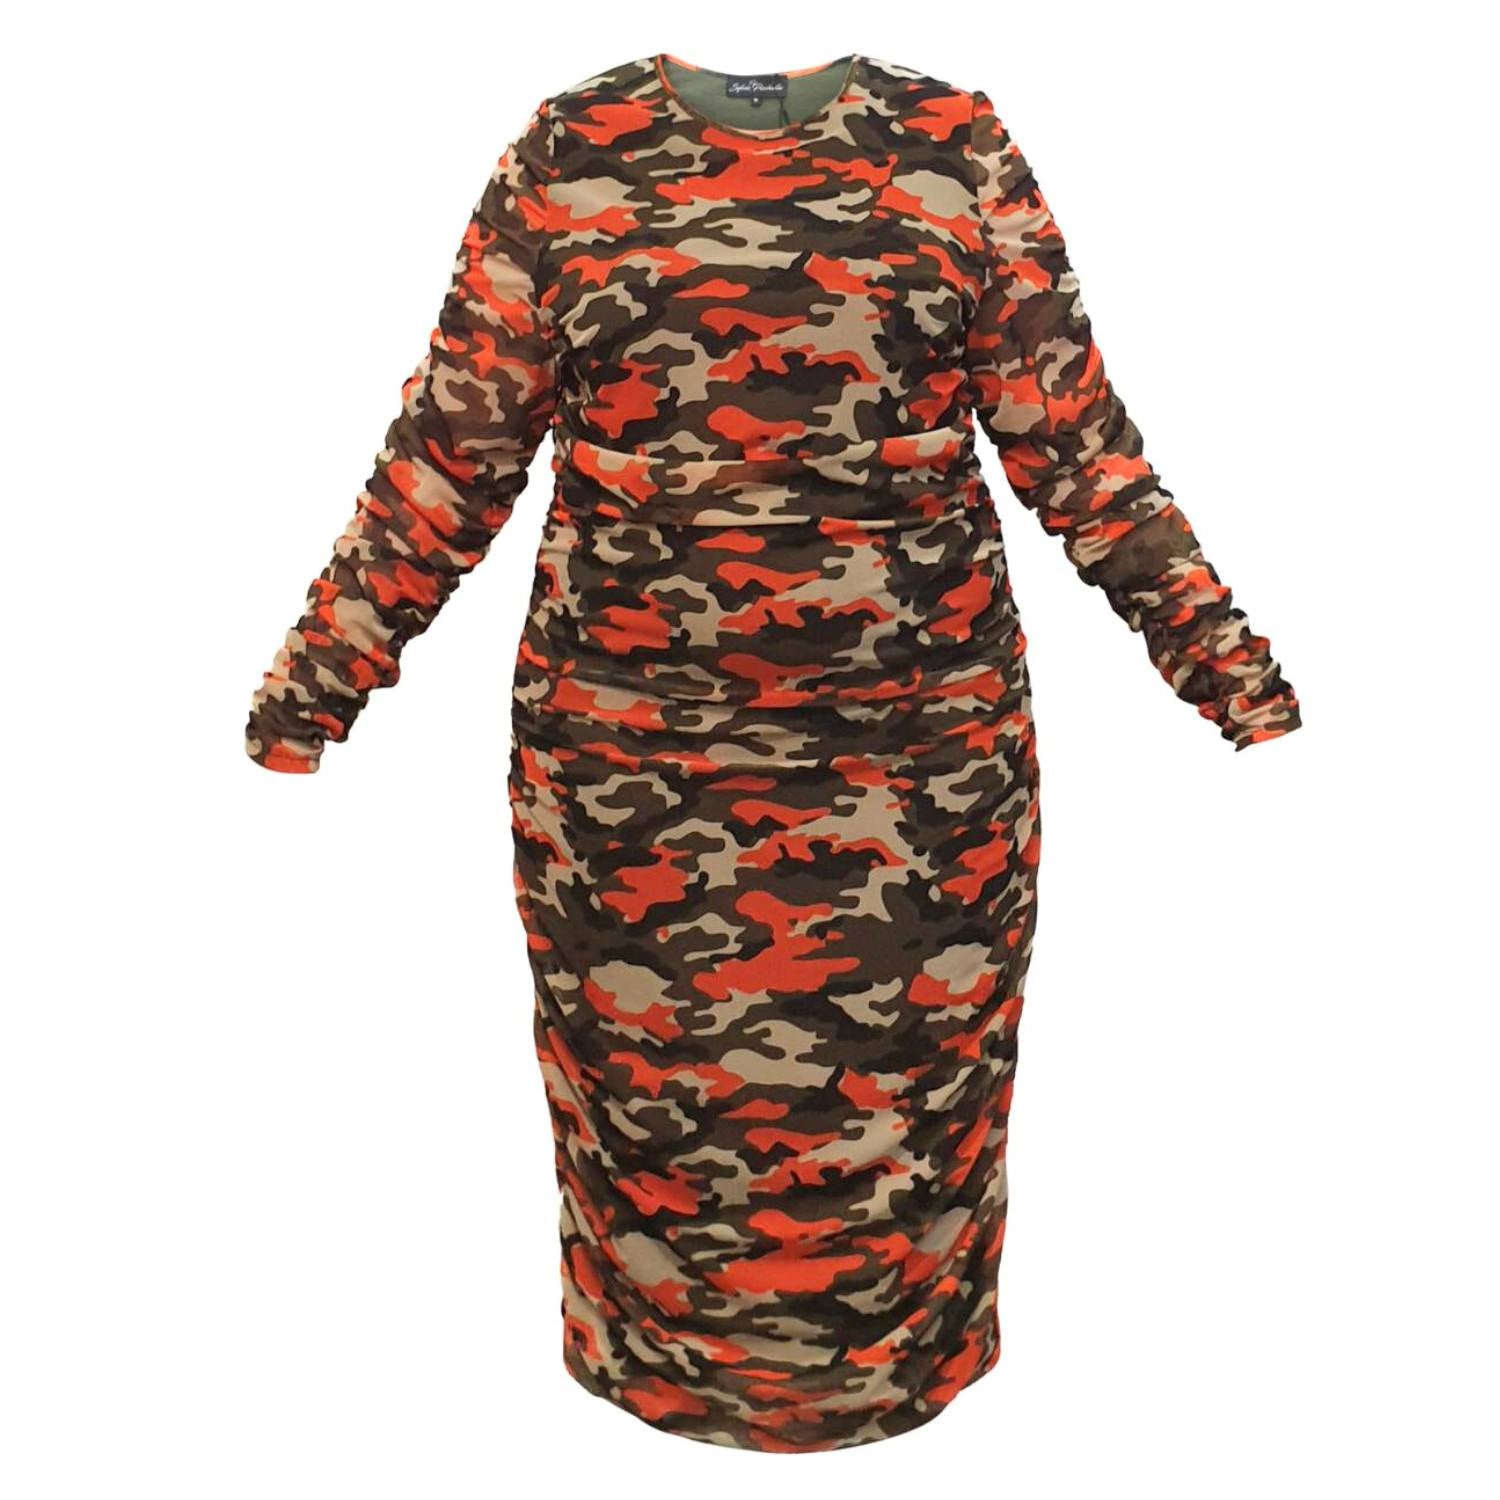 Women's Plus Size Orange Green Grey Camouflage Bodycon Midi Dress displayed as a cutout on an invisible mannequin.